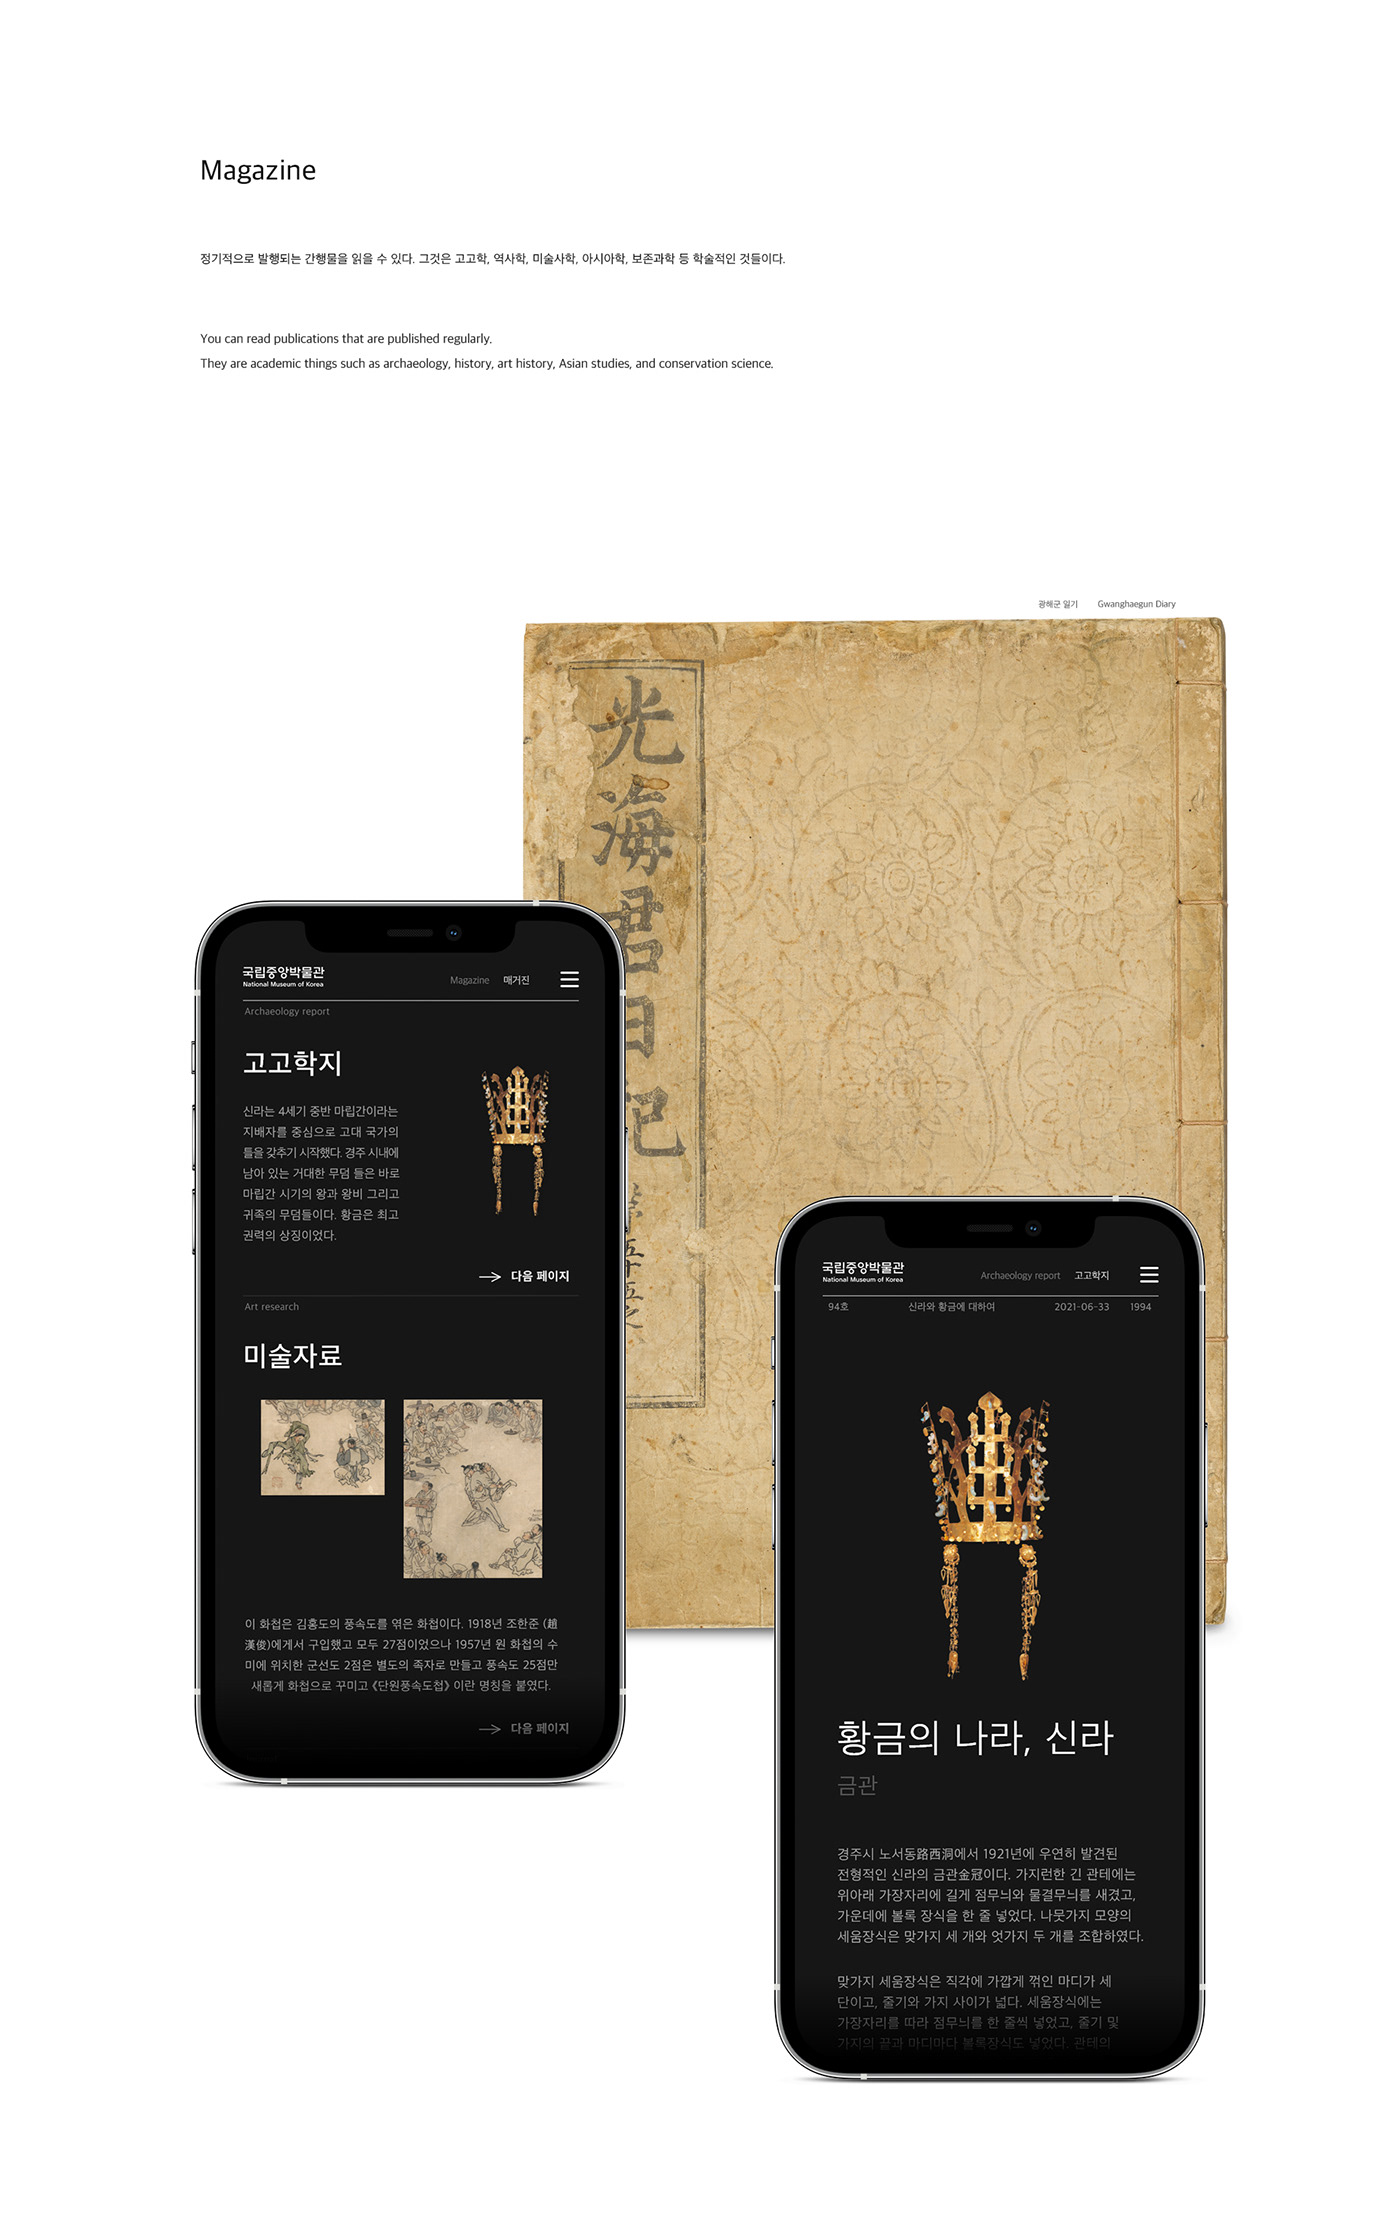 Ancient art interaction Korea museum national traditional UI ux 박물관